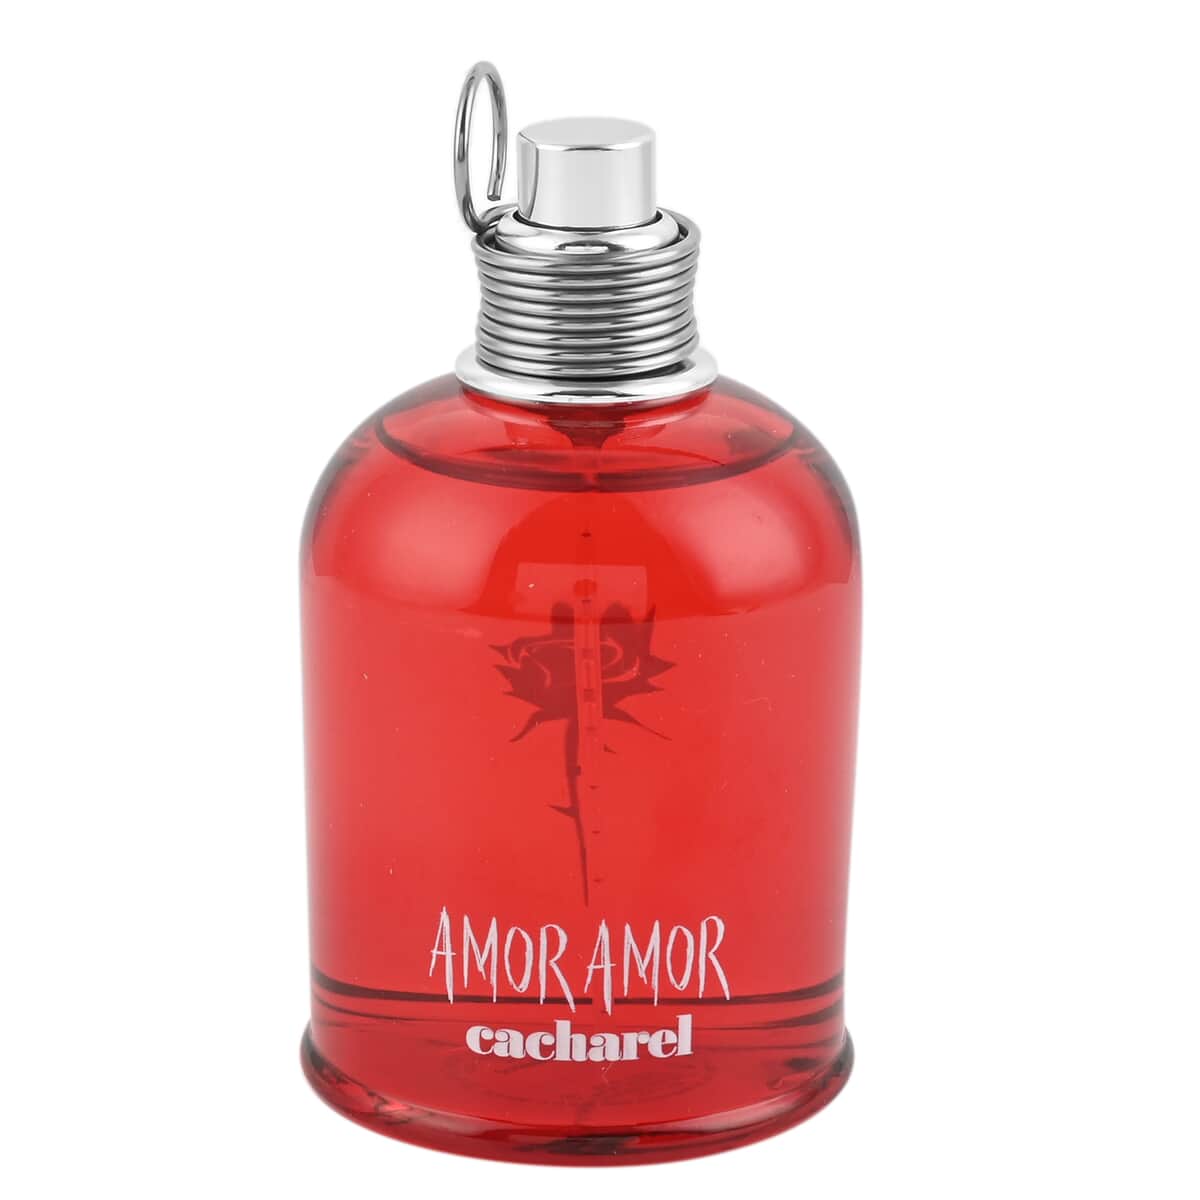 Cacharel Amor Amor Eau De Toilette 3.4 oz with FREE Cosmetic Bag image number 0